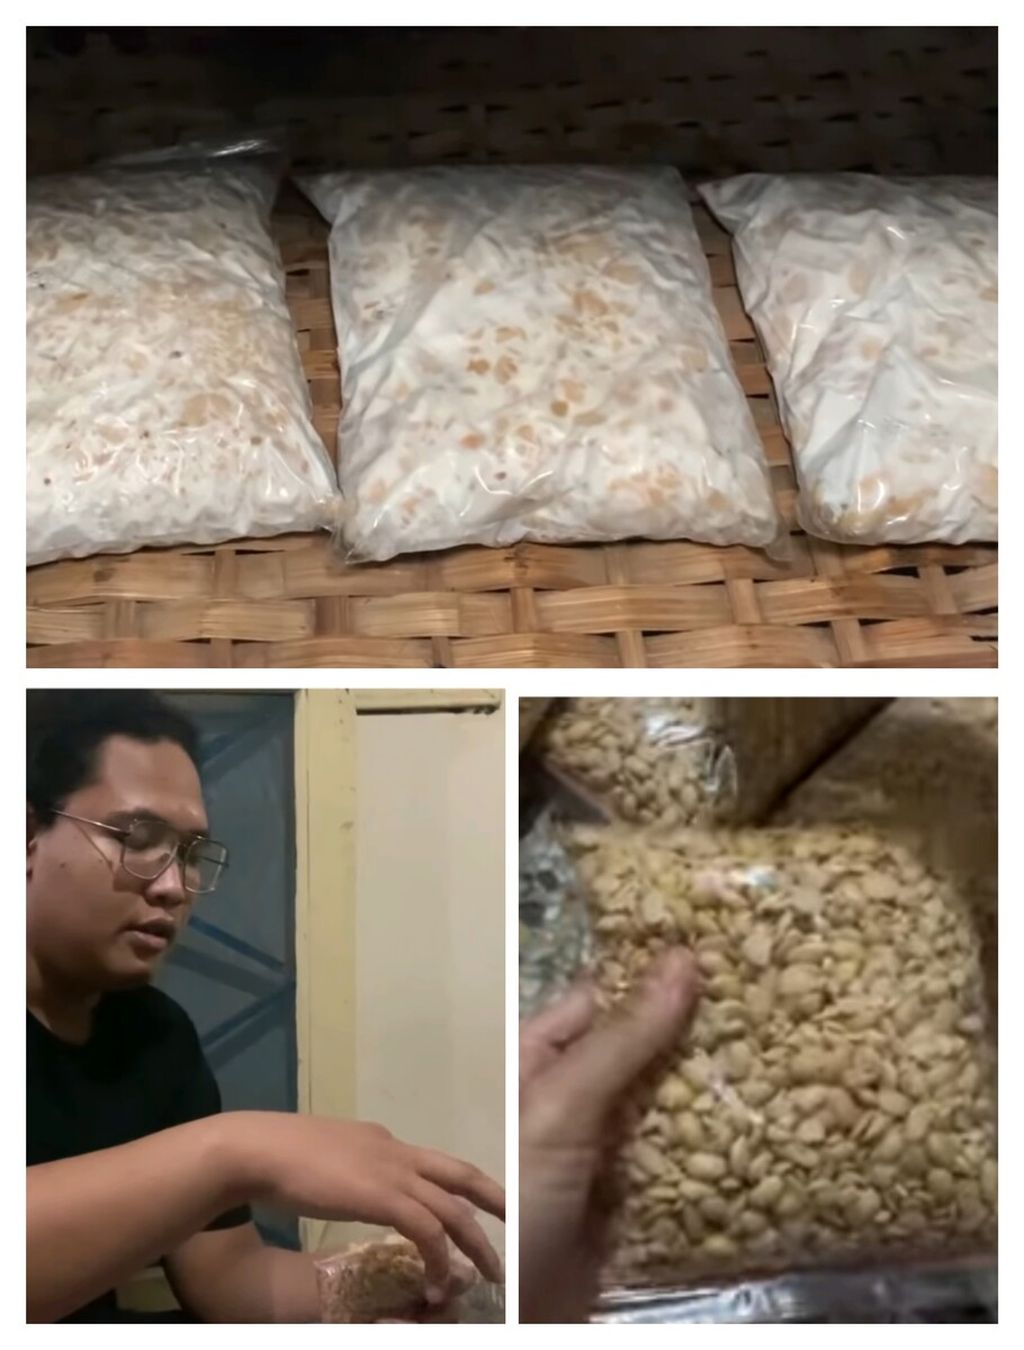 Ricky "Pepeng" Yakob, an Indonesian student and YouTuber in India, produces tempeh in India. Every week, he is able to make 60 packages of tempeh to be marketed to Indian and foreign students, as well as Indonesian diplomats serving in India.